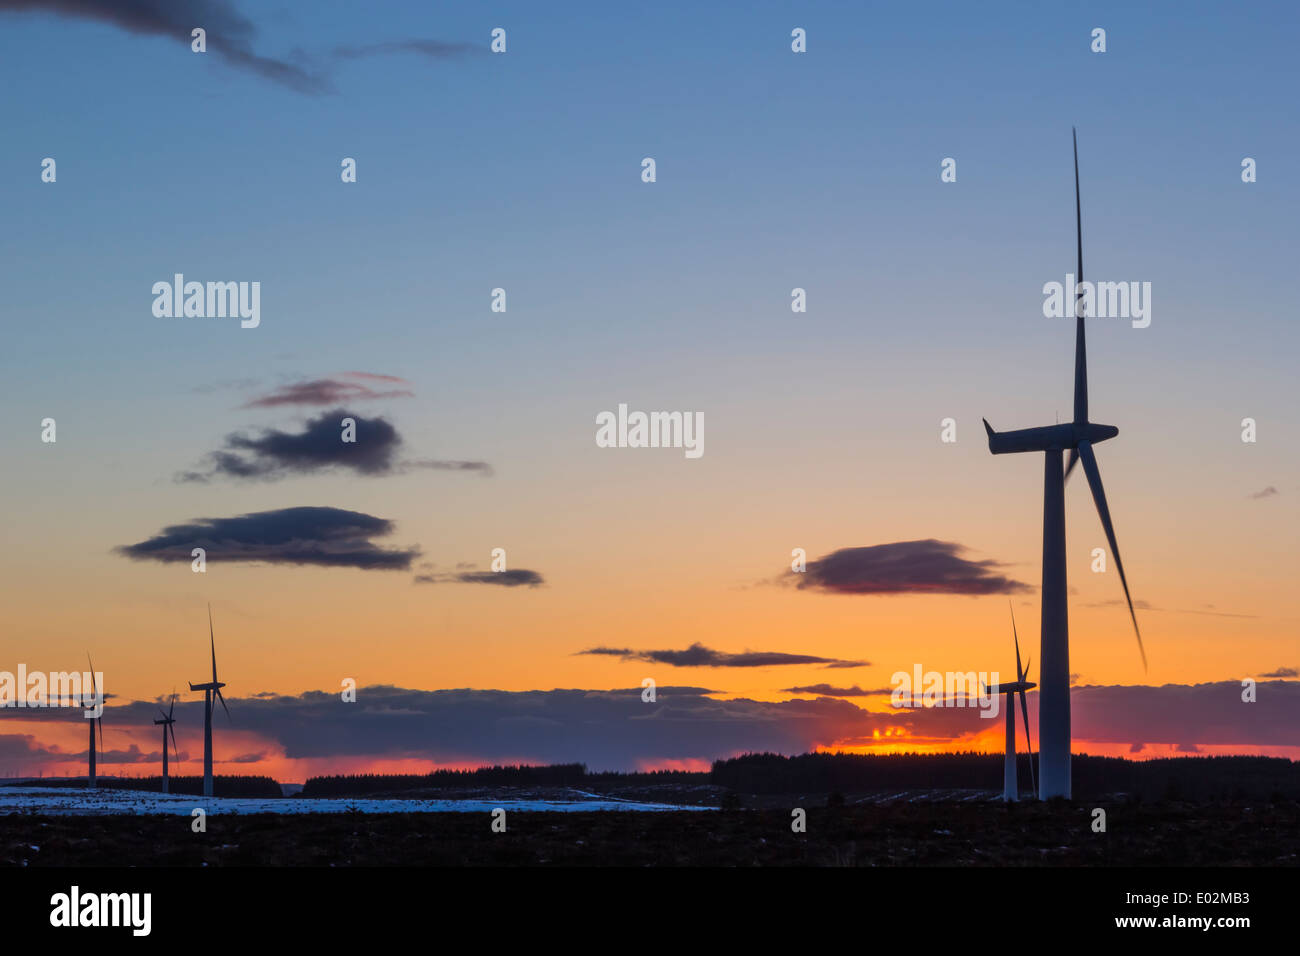 Wind Turbines silhouetted against a Fiery Orange Sunset, with Snow on the ground and some clouds in the sky. Stock Photo